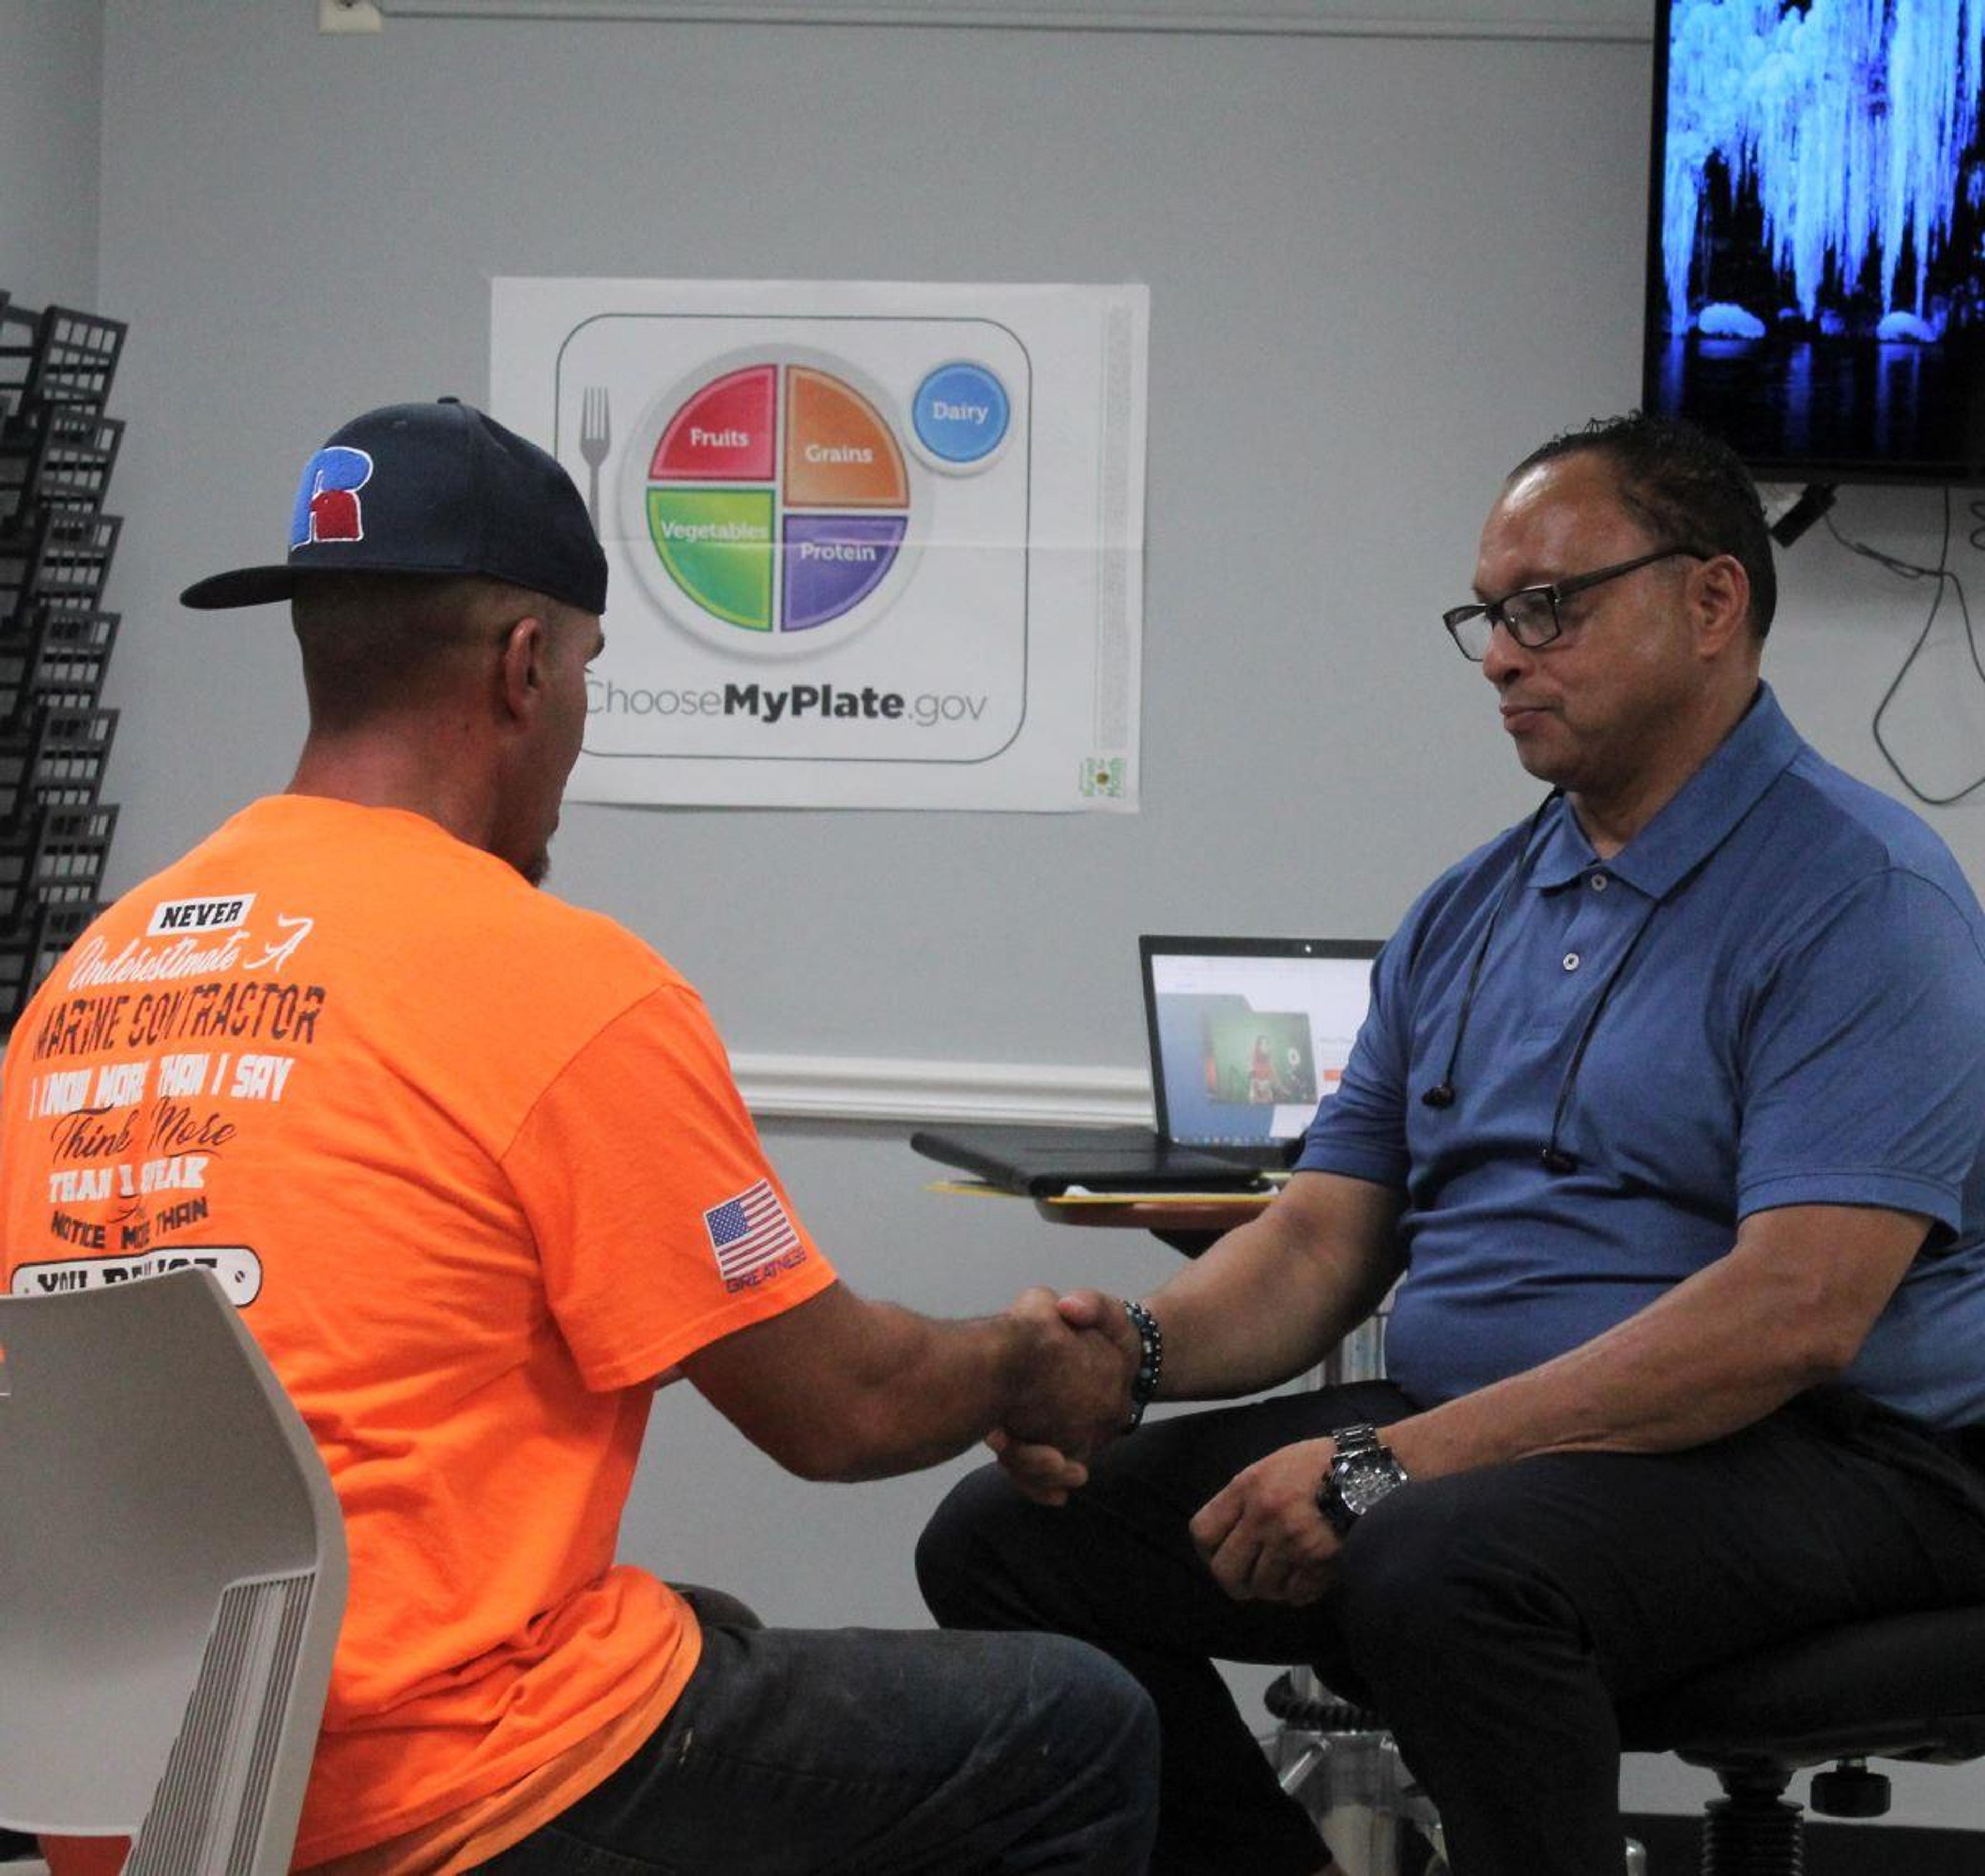 Keith Graham, the Peer Recovery Coach at Popoff Family Health Center, chats with a client during a coaching session.